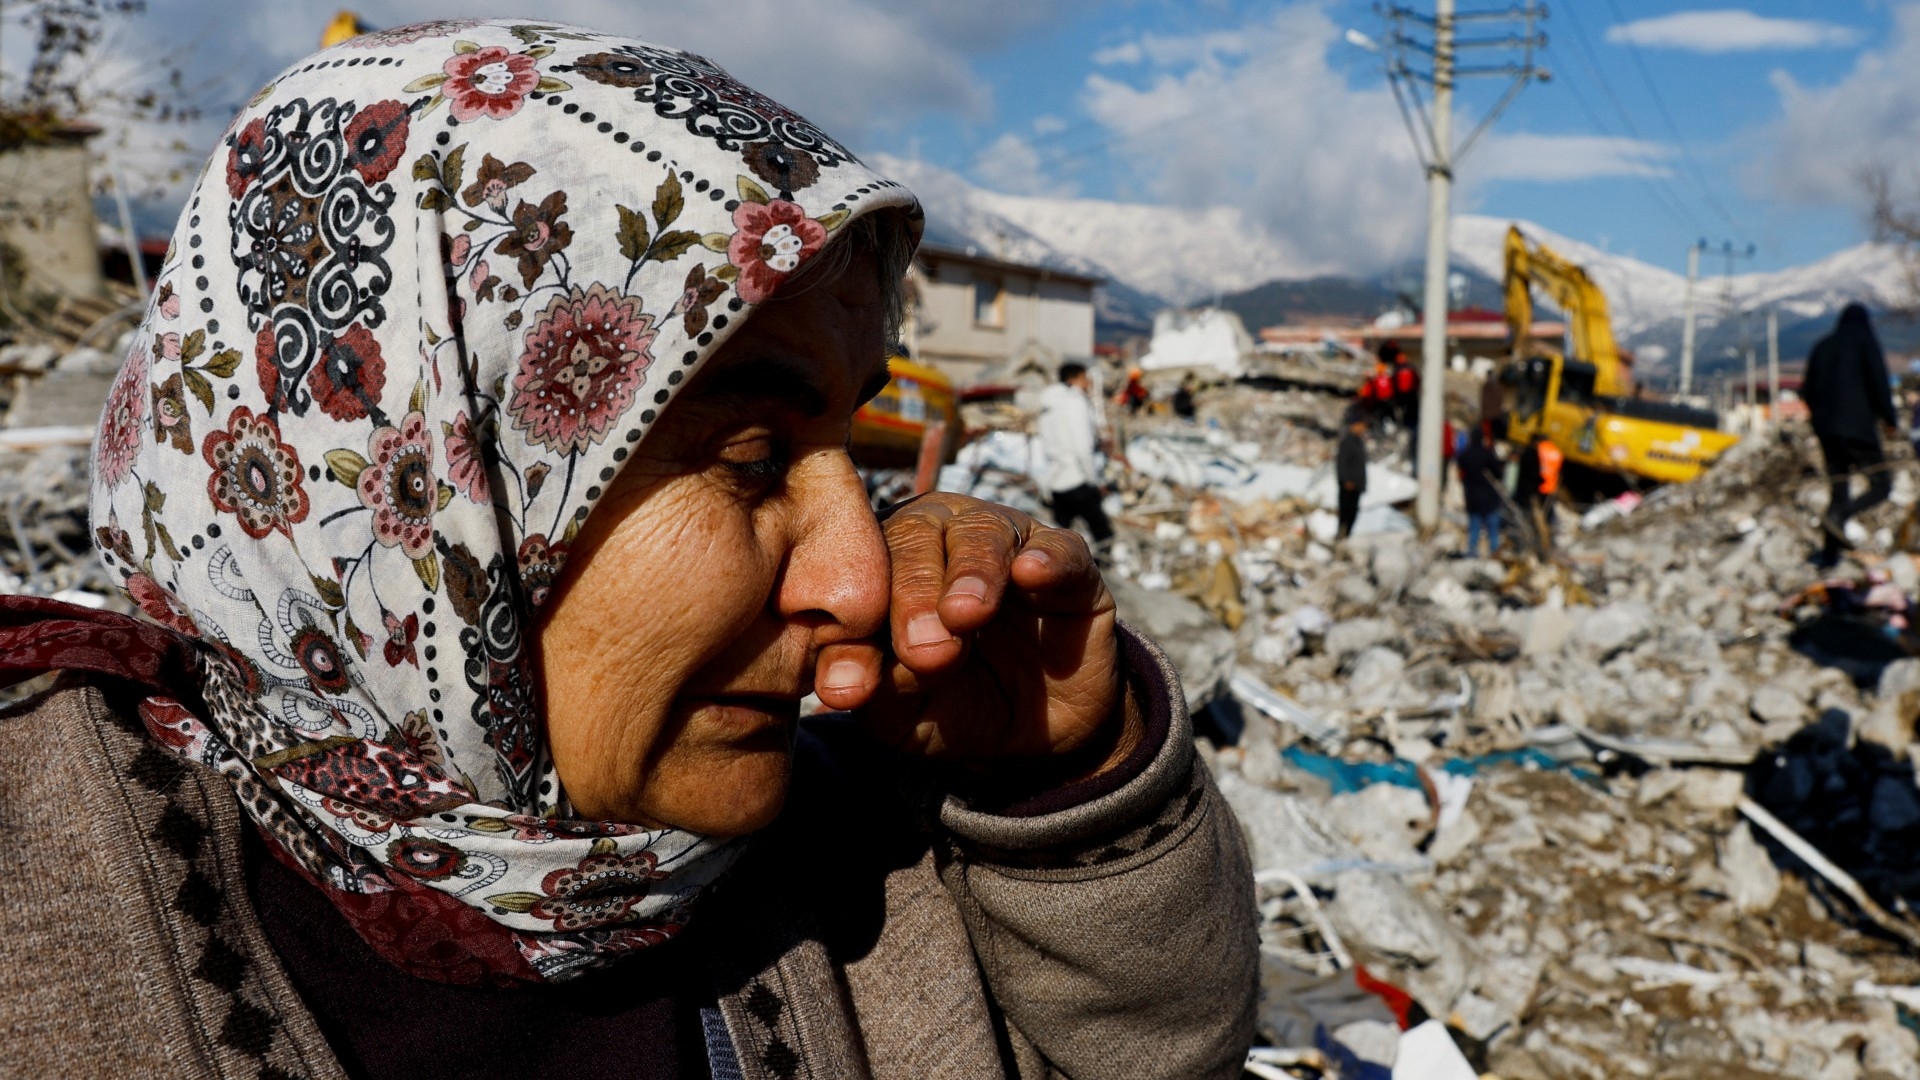 A women reacts as she stands near rubble and damages following an earthquake in Gaziantep, Turkey, 7 February 2023 (Reuters)